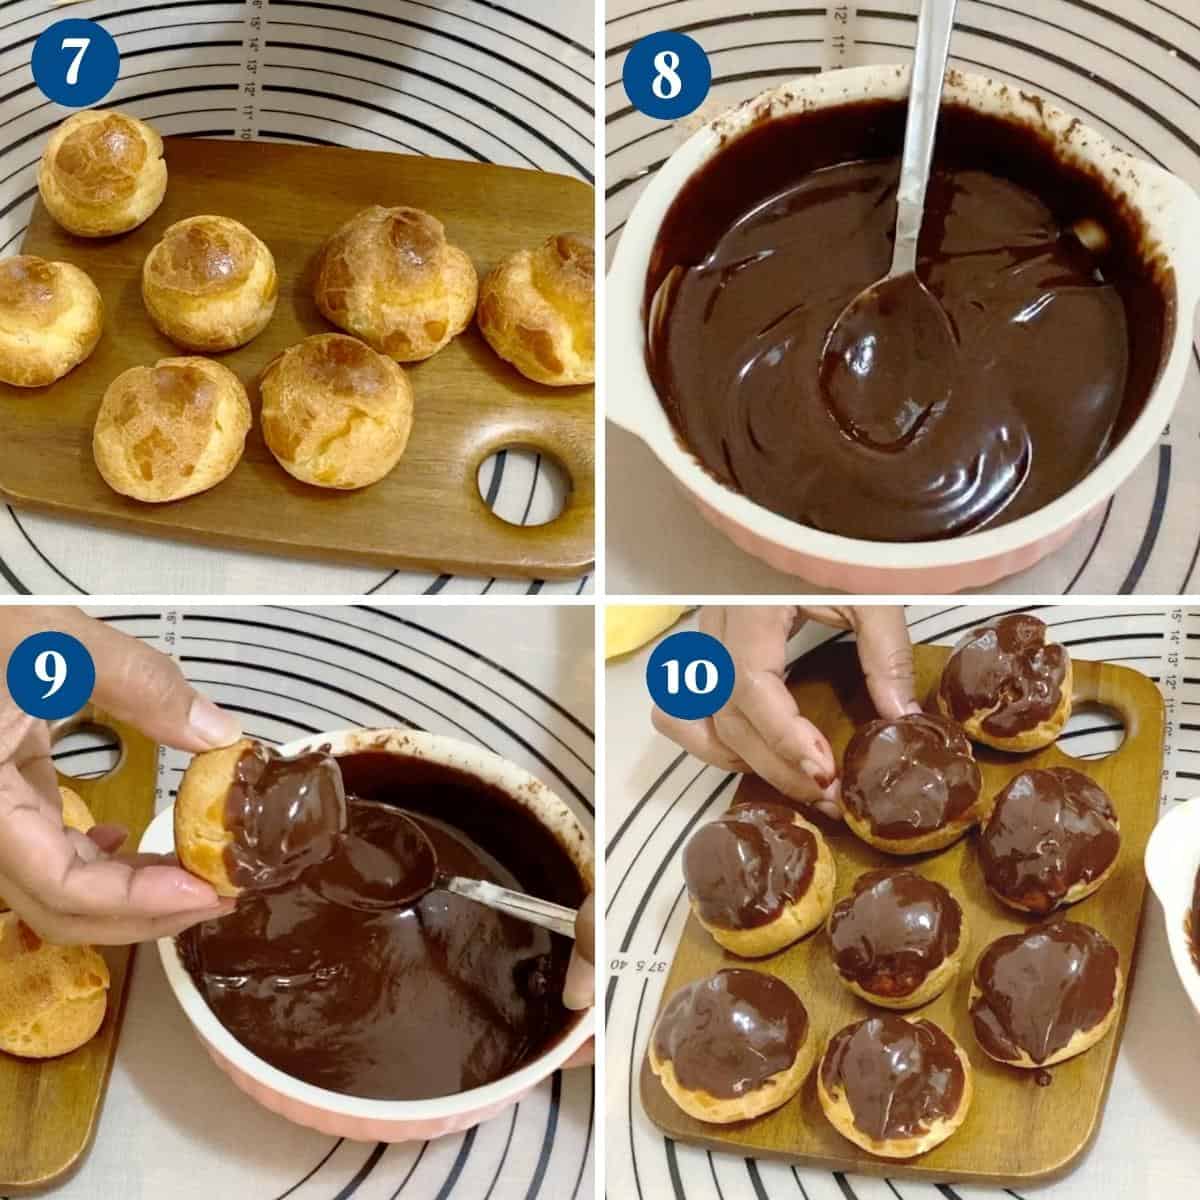 Progress pictures collage glazing the profiteroles with chocolate.